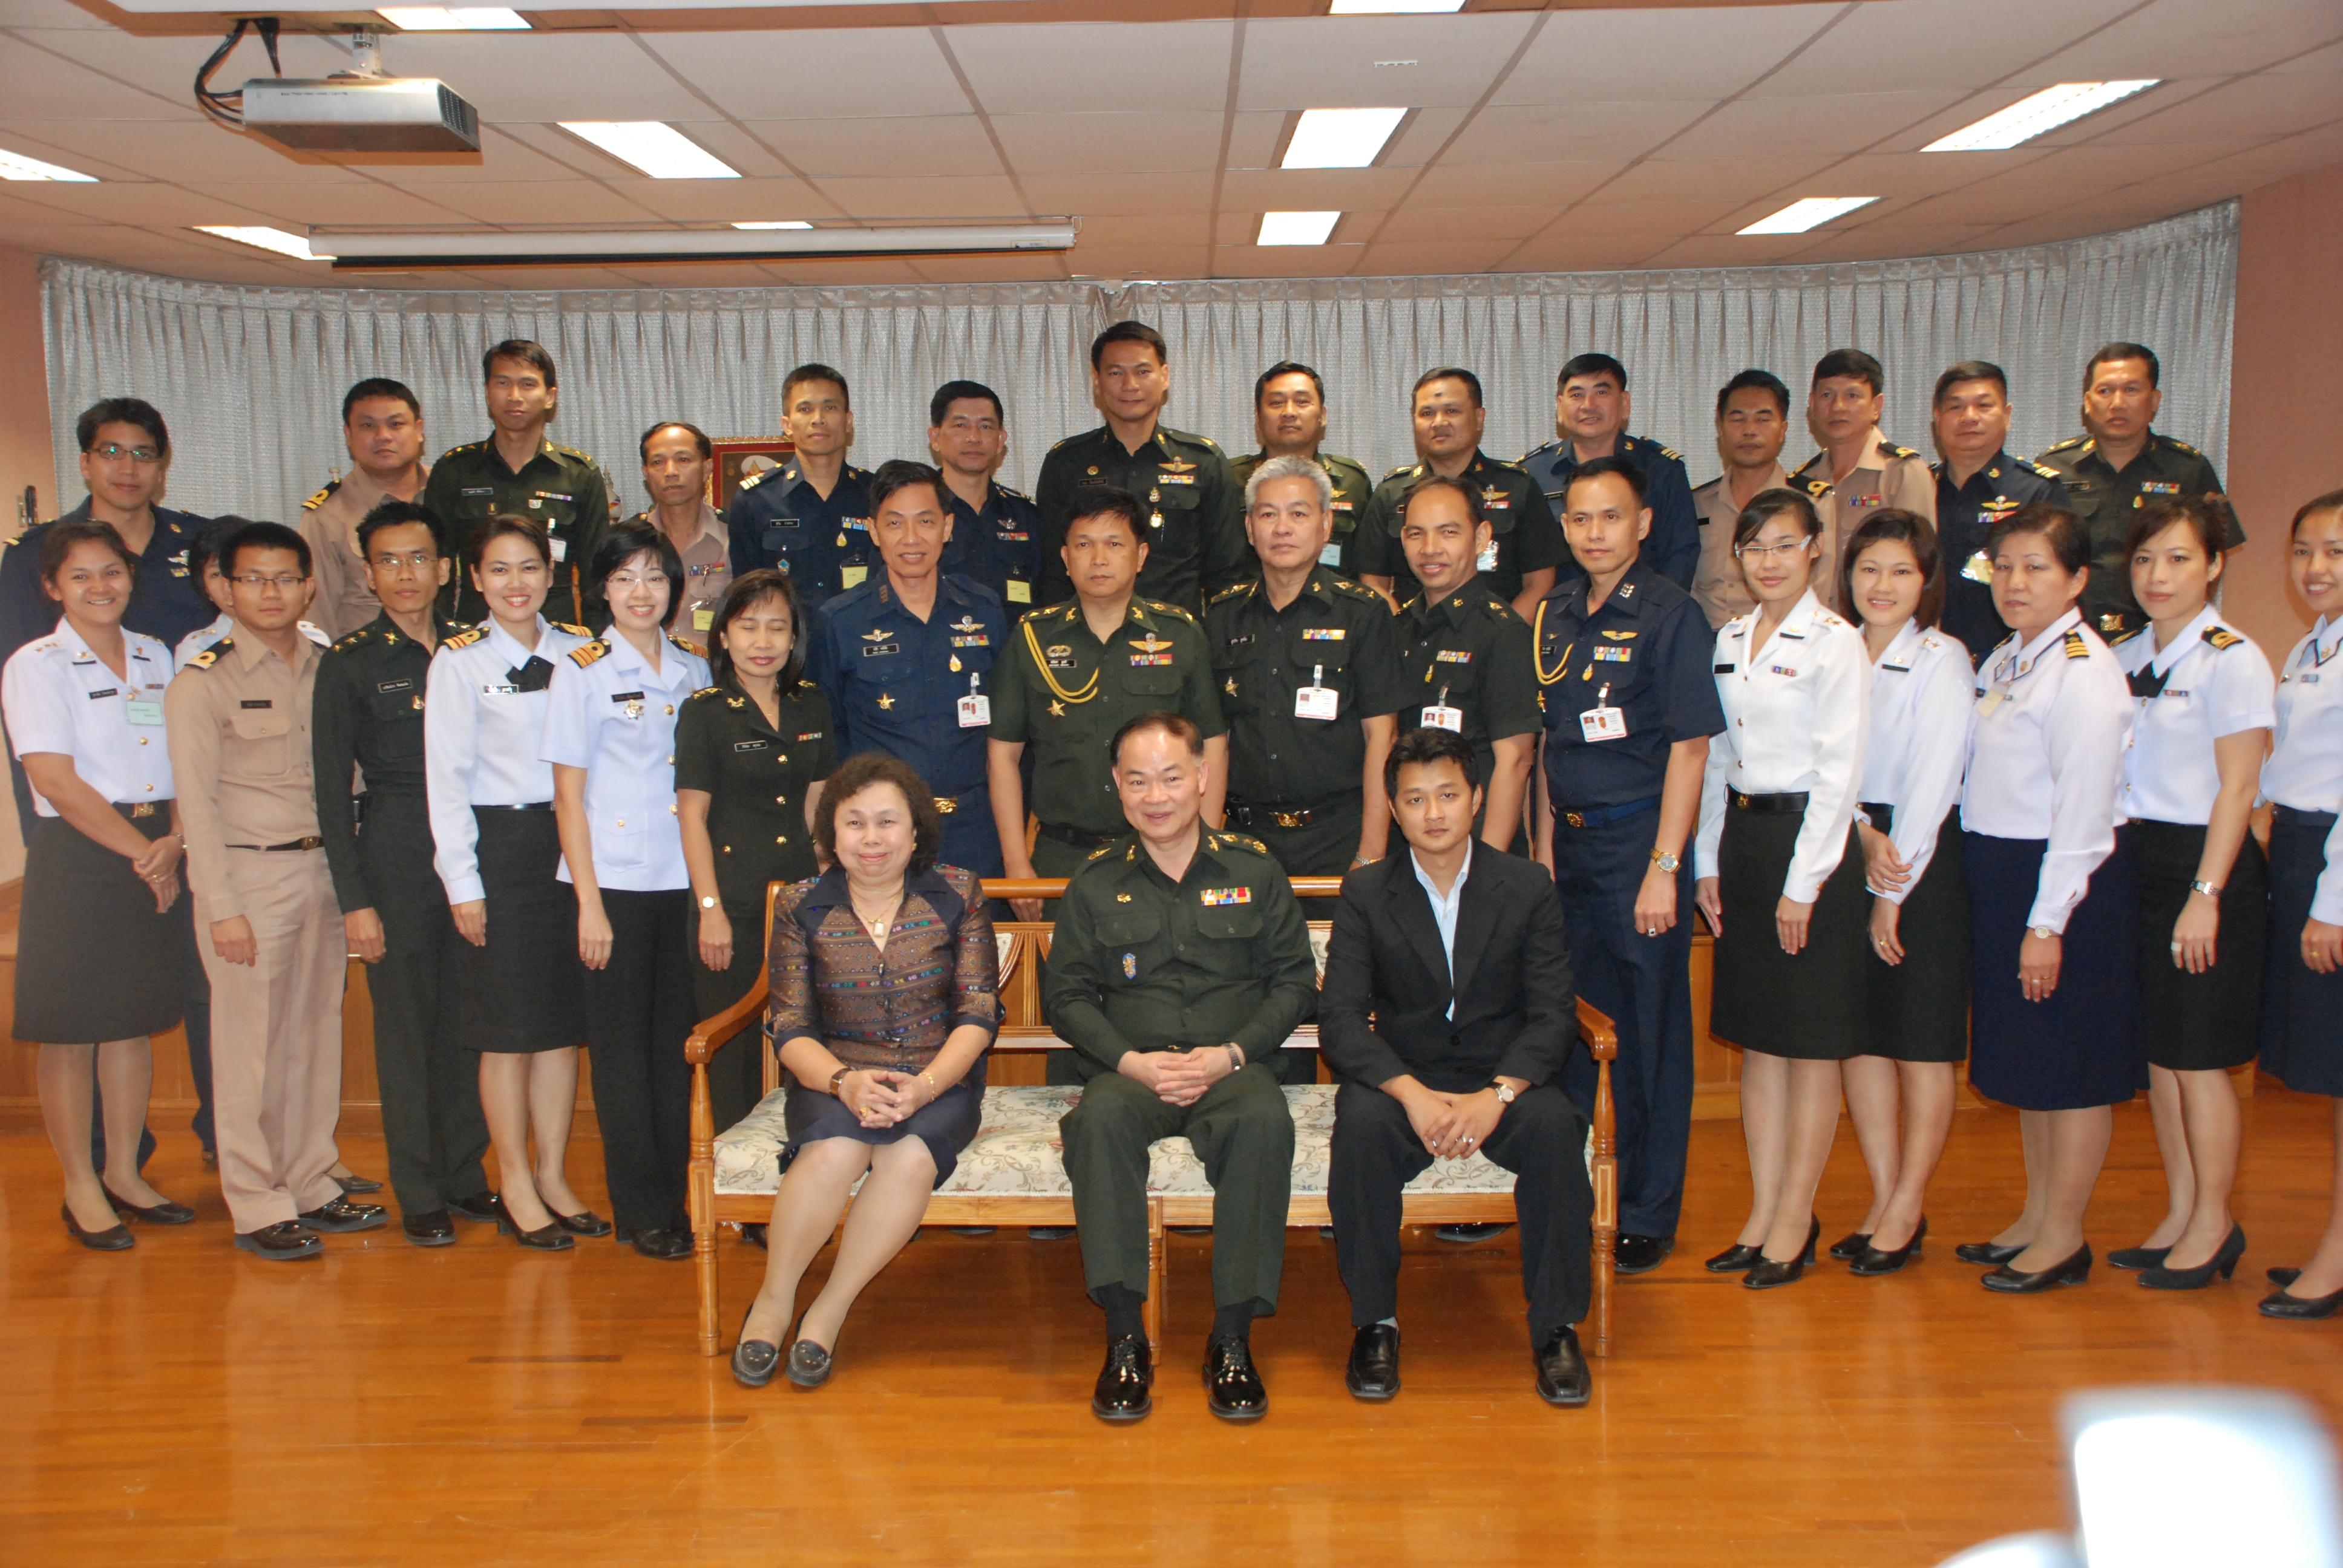 Welcoming the visitors from the National Defence Studies Institute